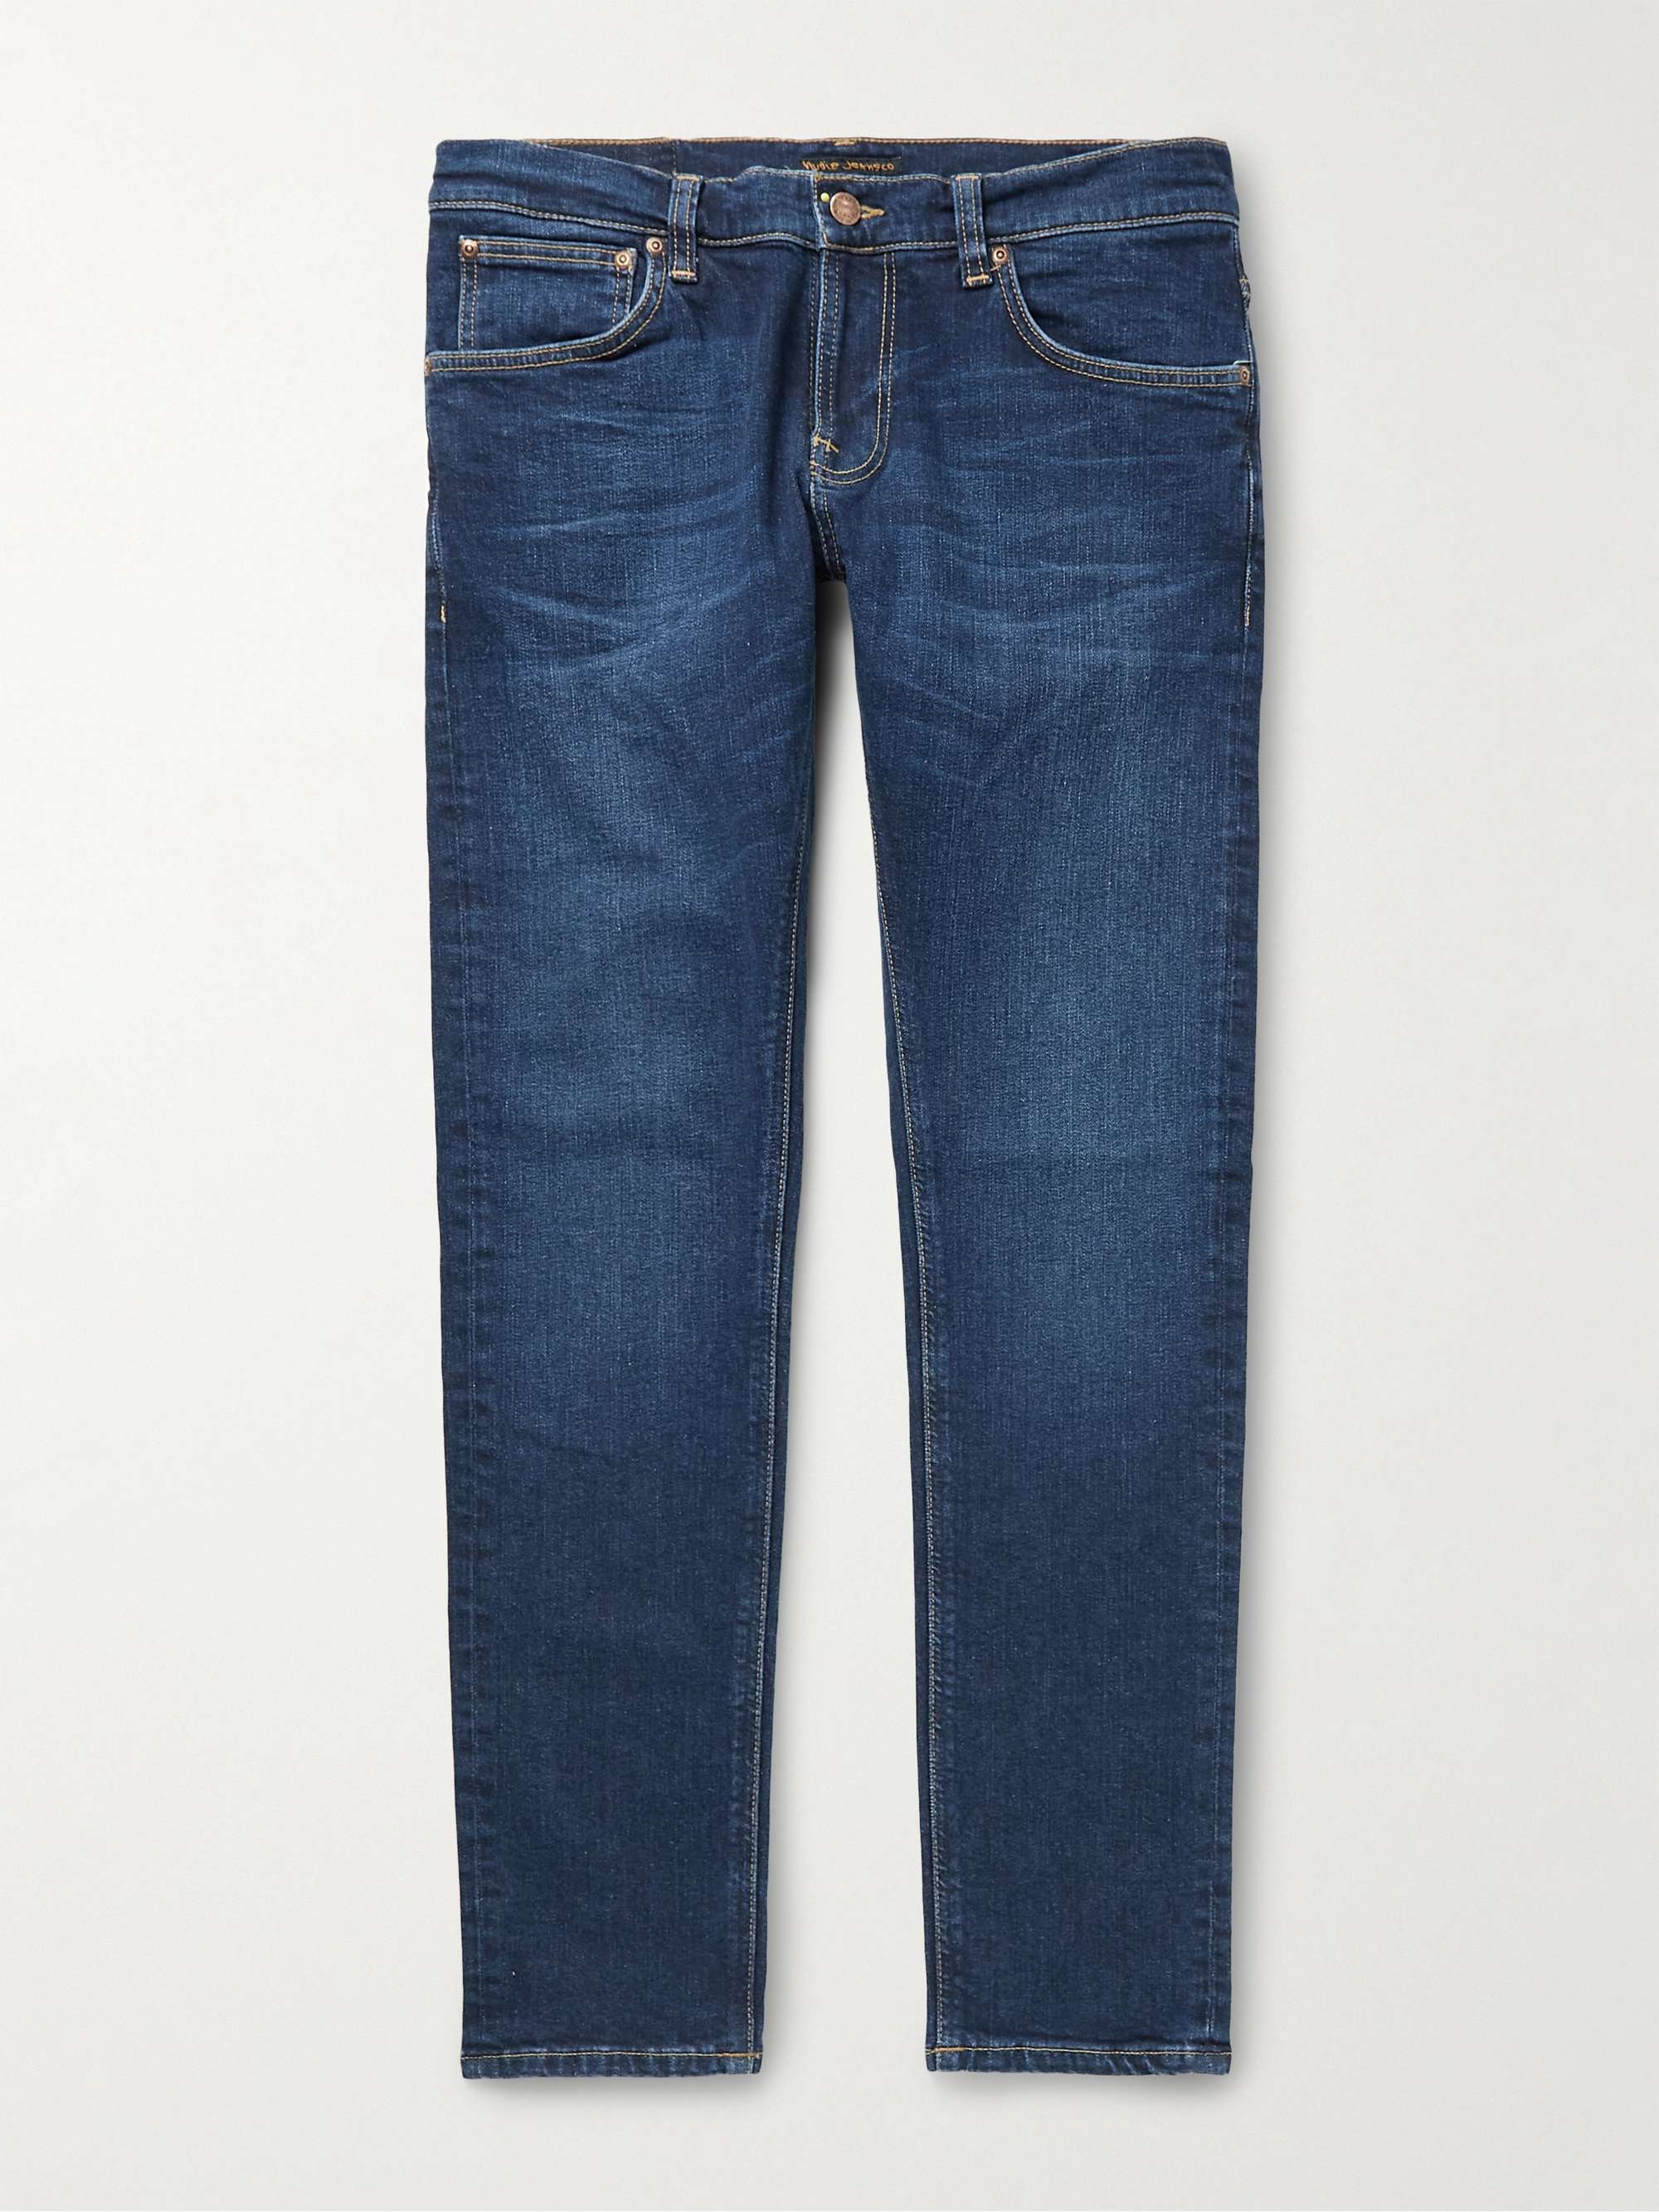 NUDIE JEANS Tight Terry Skinny-Fit Organic Jeans | MR PORTER